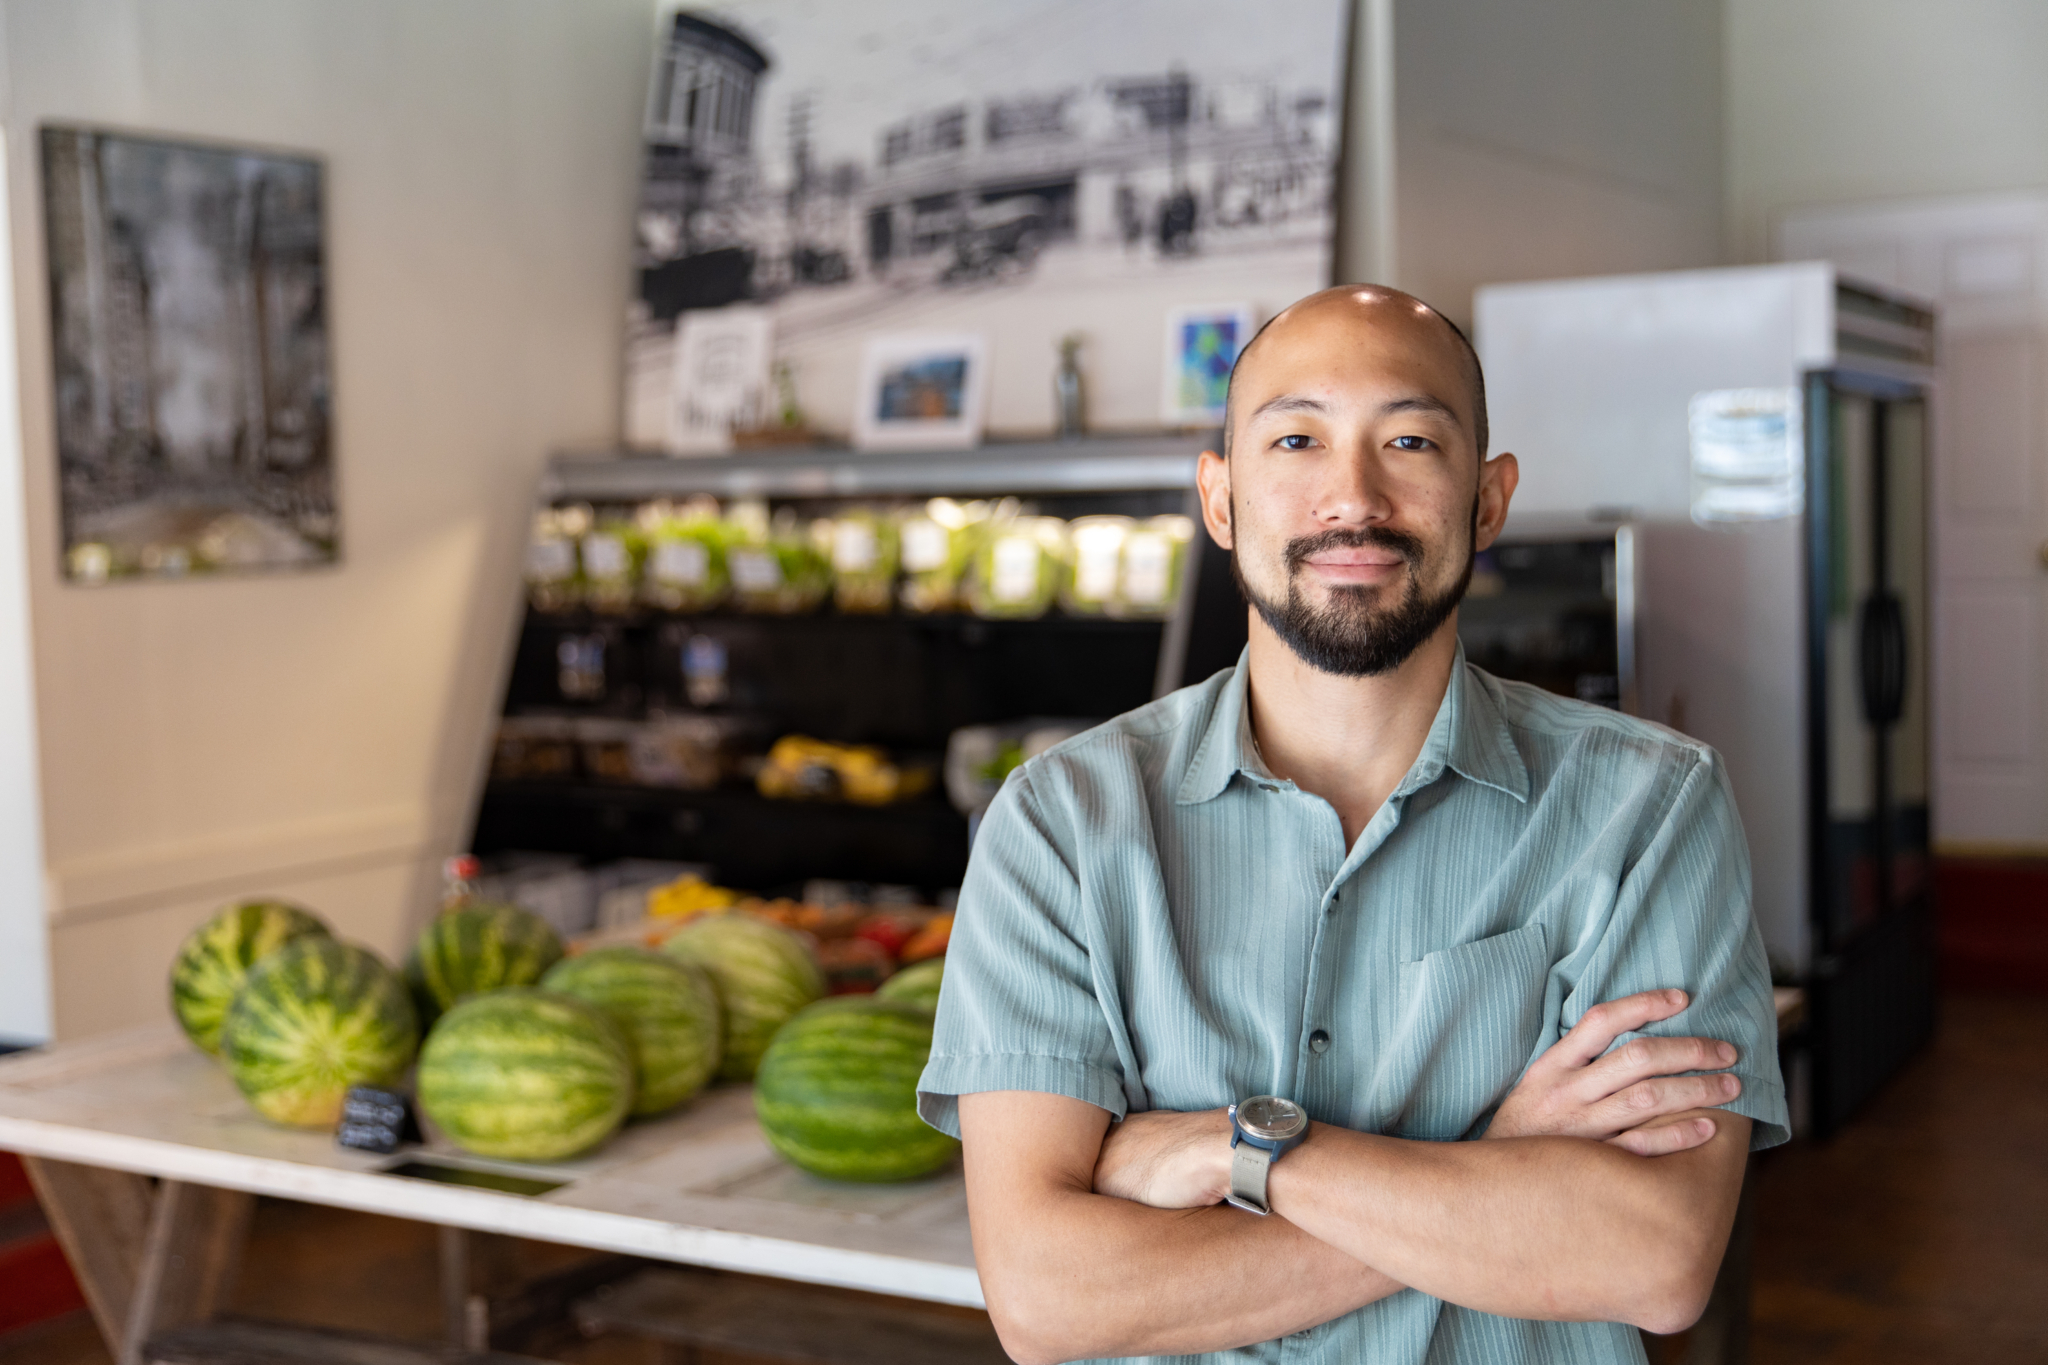 Justin Petruff is one of the owners of Local Source Market & Grocery